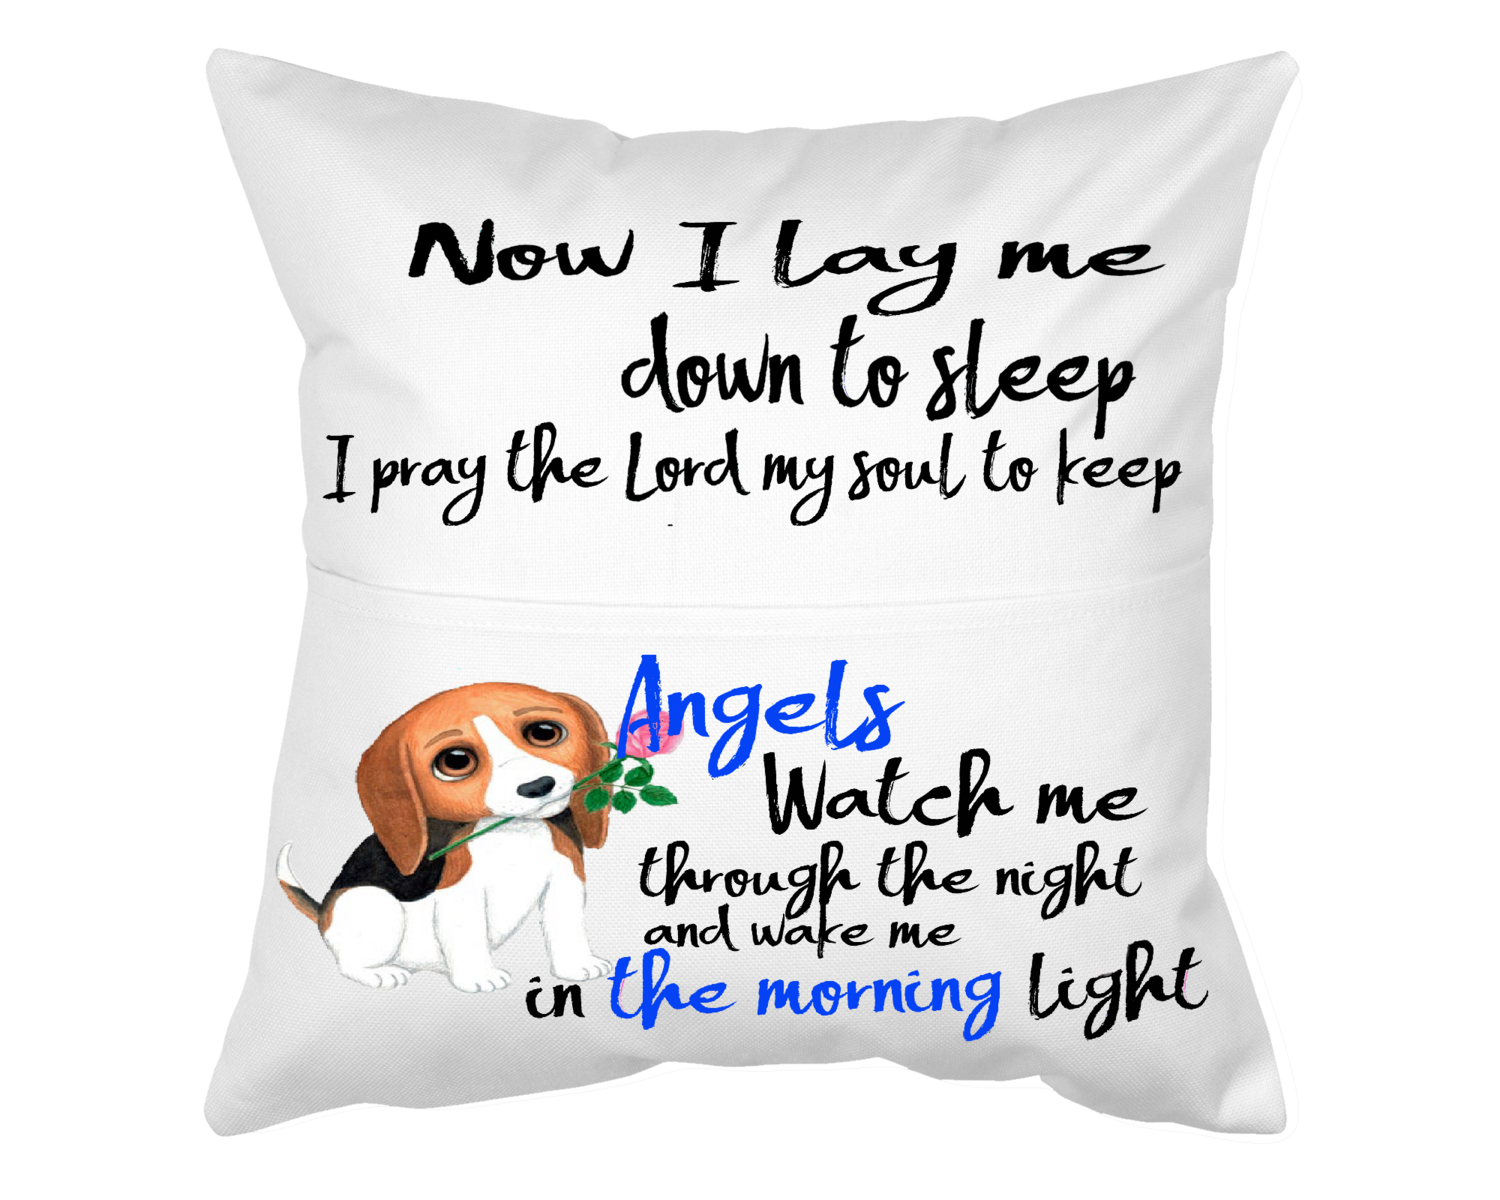 Dog Pillow With Pocket: NOW I LAY ME DOWN TO SLEEP, I PRAY THE LORD TO KEEP, ANGELS WATCH ME THROUGH THE NIGHT AND WAKE ME IN THE MORNING LIGHT